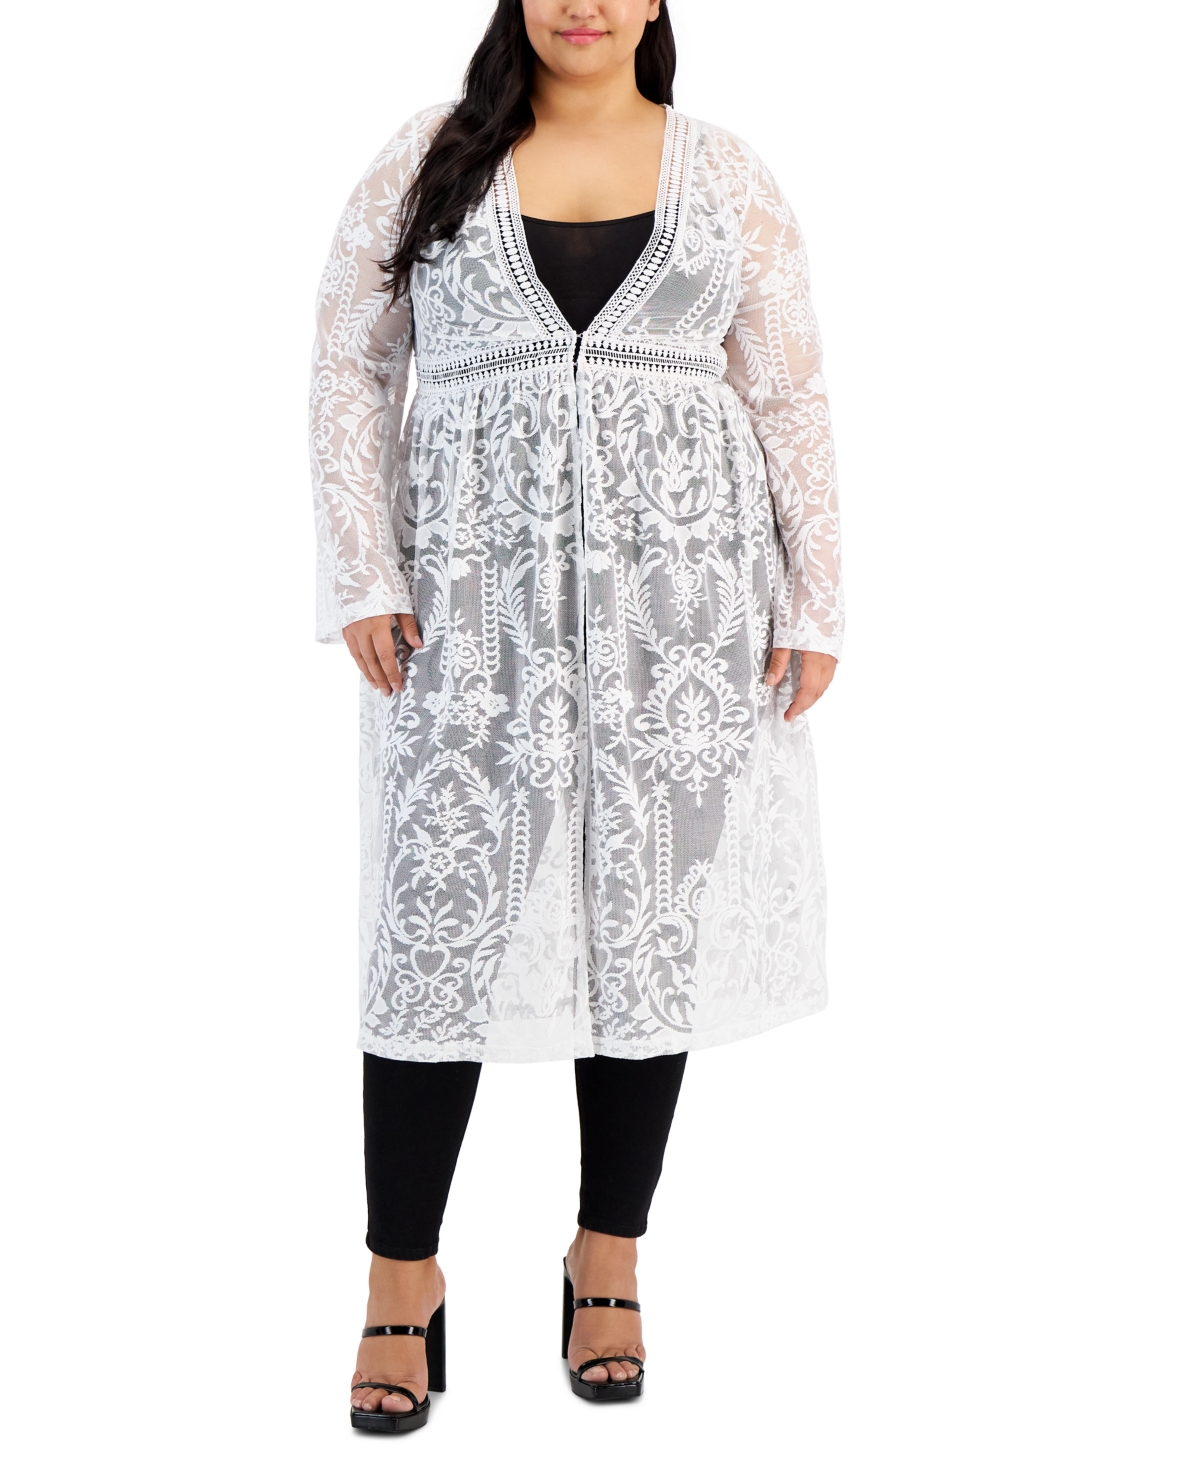 Full Circle Trends Trendy Plus Size Lace Longline Duster